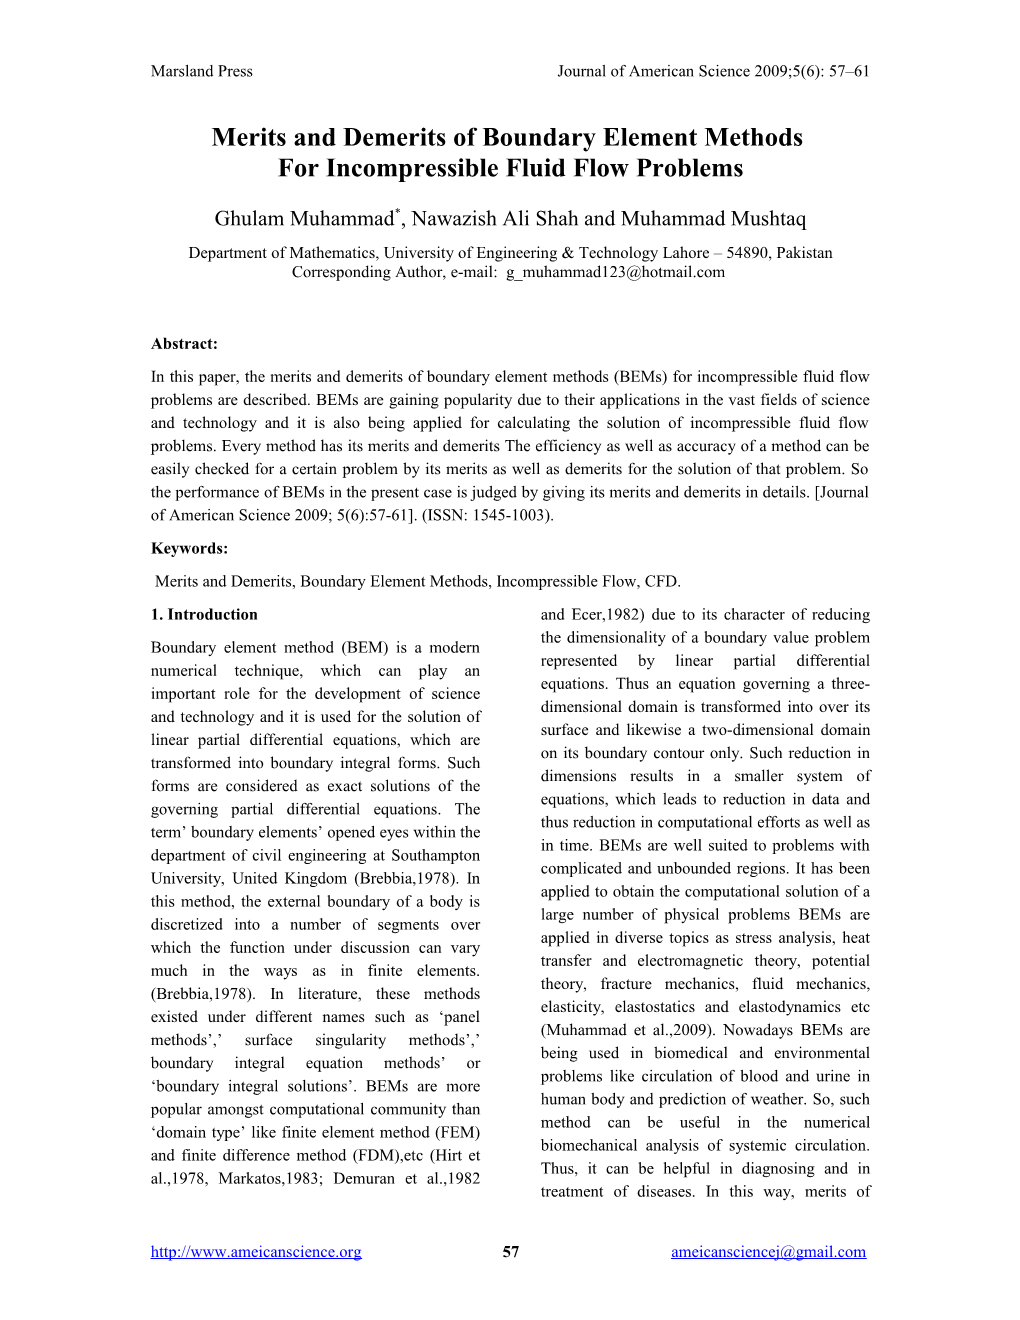 Merits and Demerits of Boundary Element Method for Incompressible Fluid Flow Problems